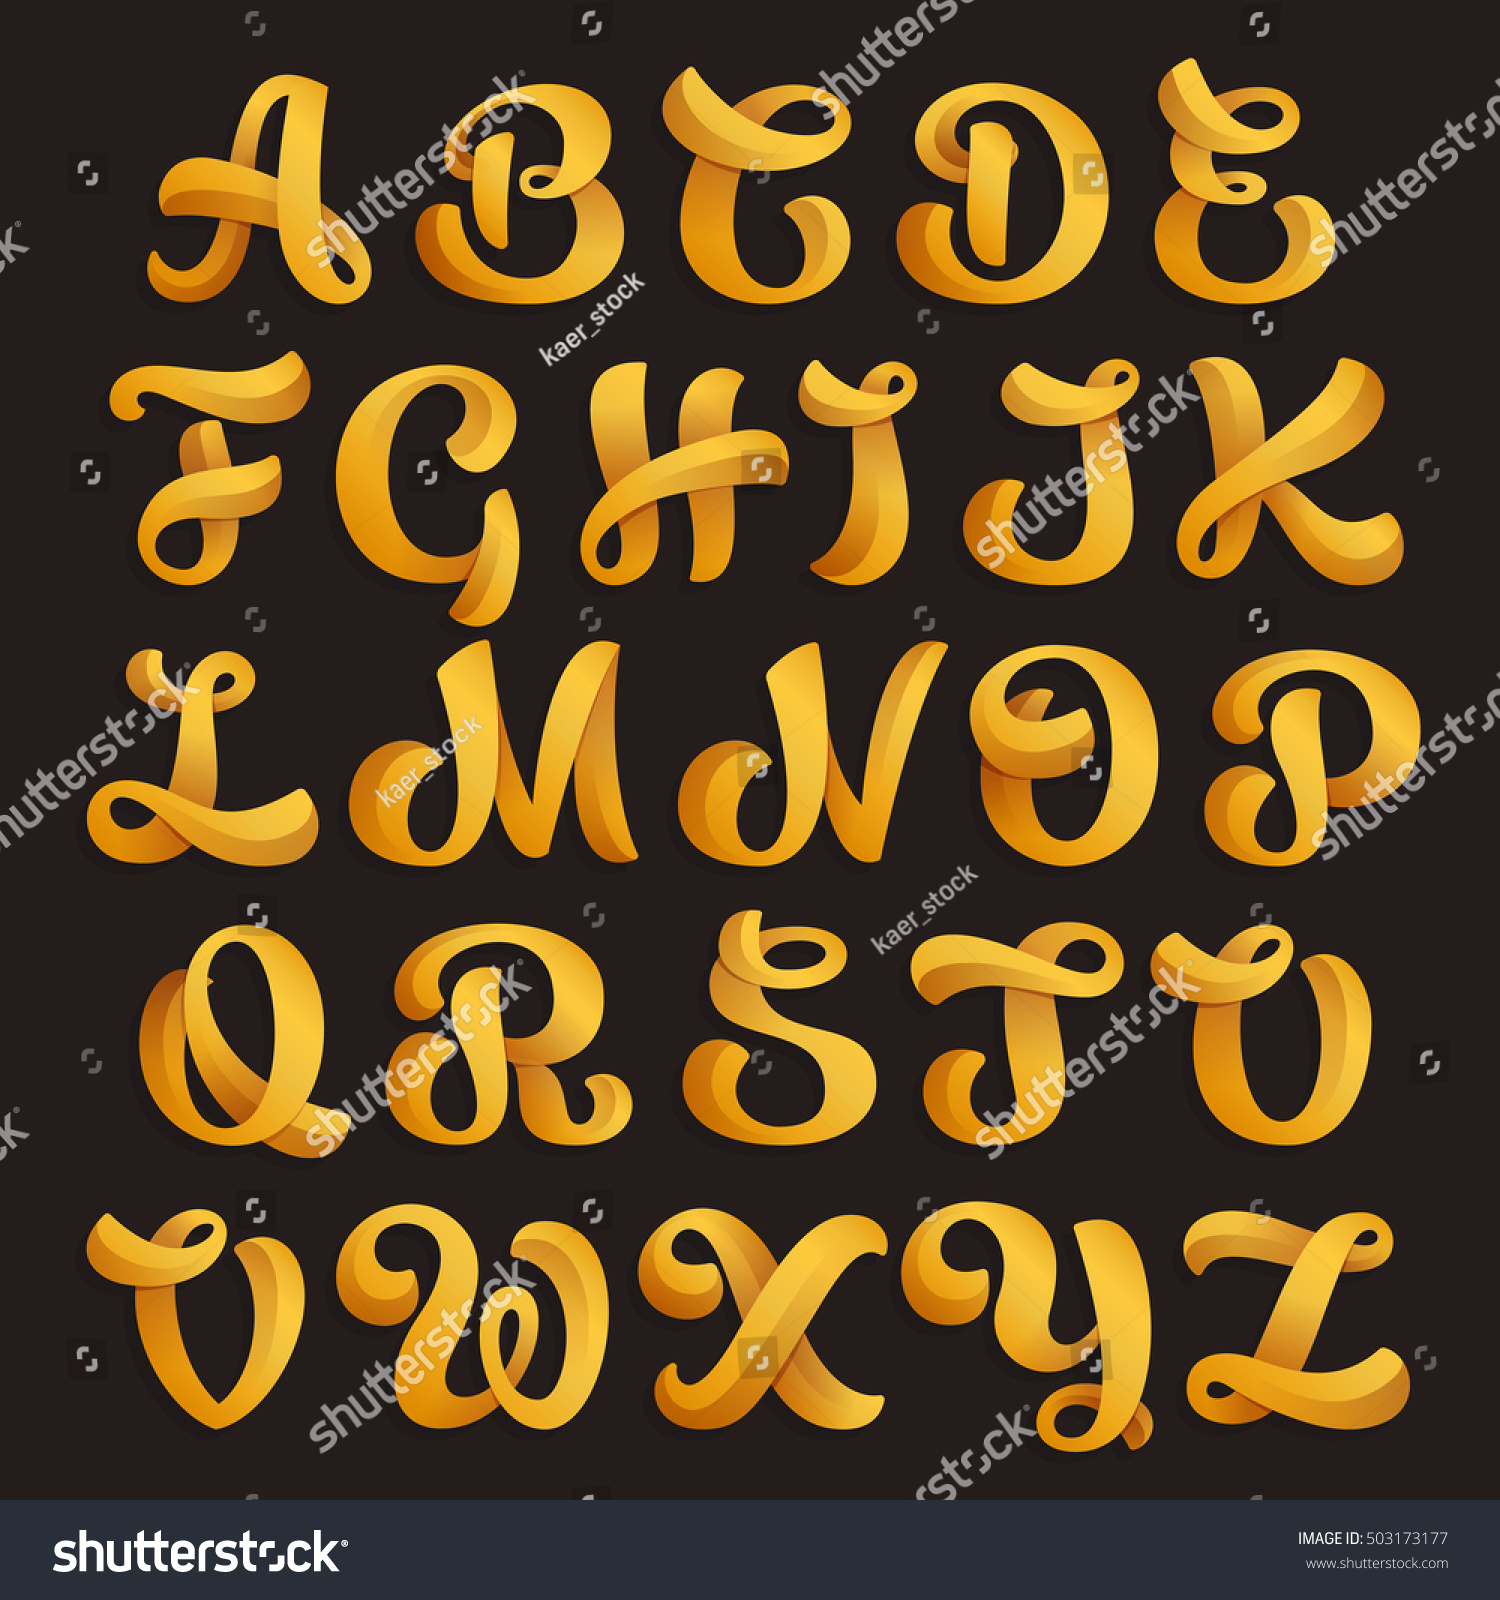 Gold Shining Letters Vector Elements Jewelry Stock Free)